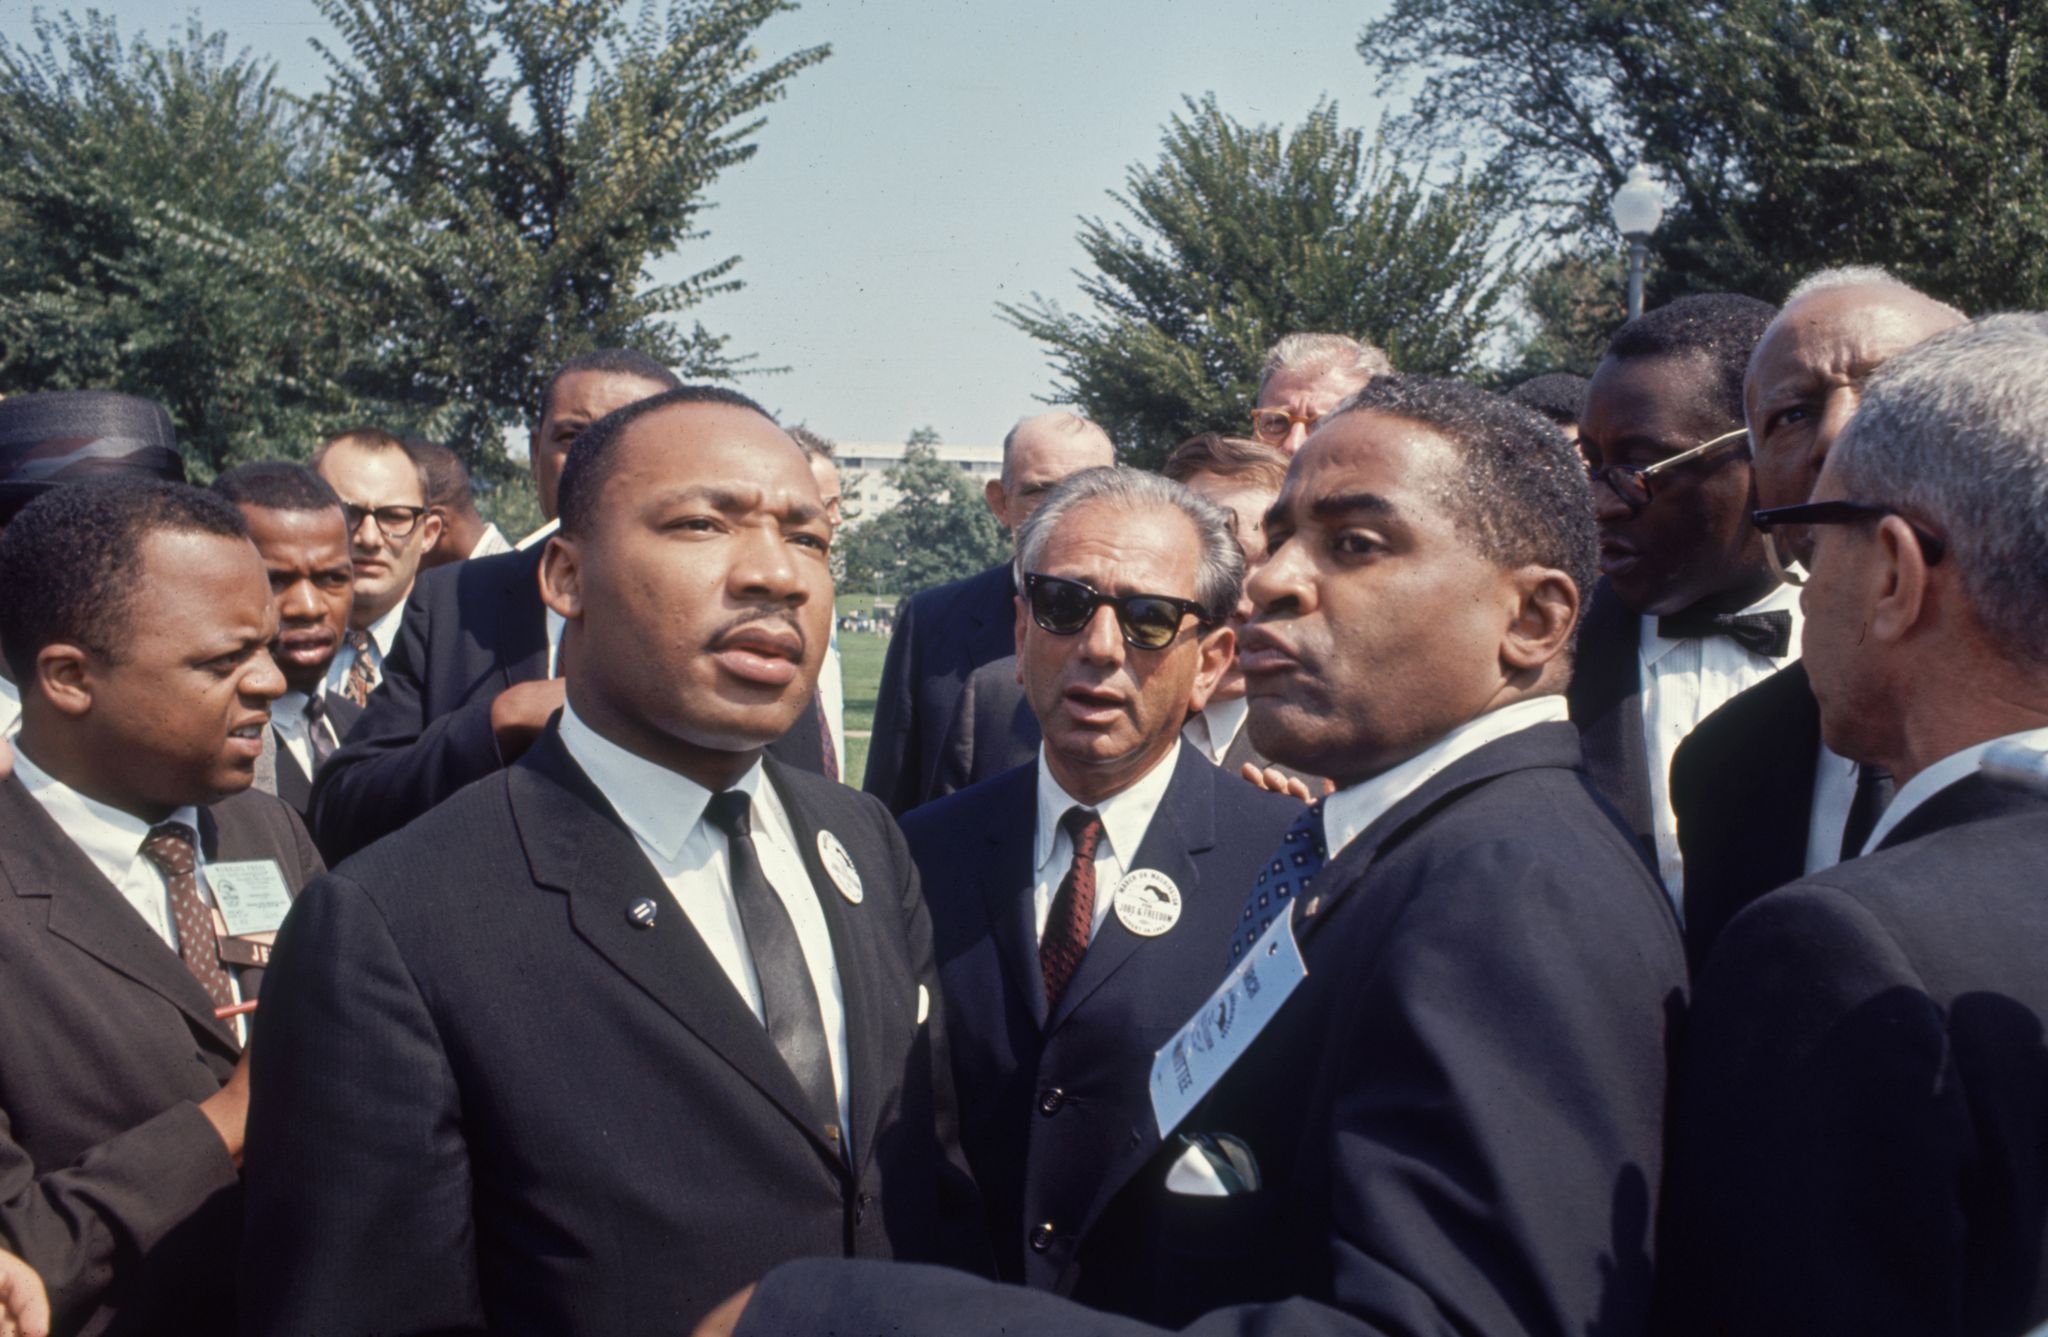 subject martin luther king and on his right is rabbi joachim prinz march on washington for jobs and freedom washington dcaugust 28, 1963photographer  1202322